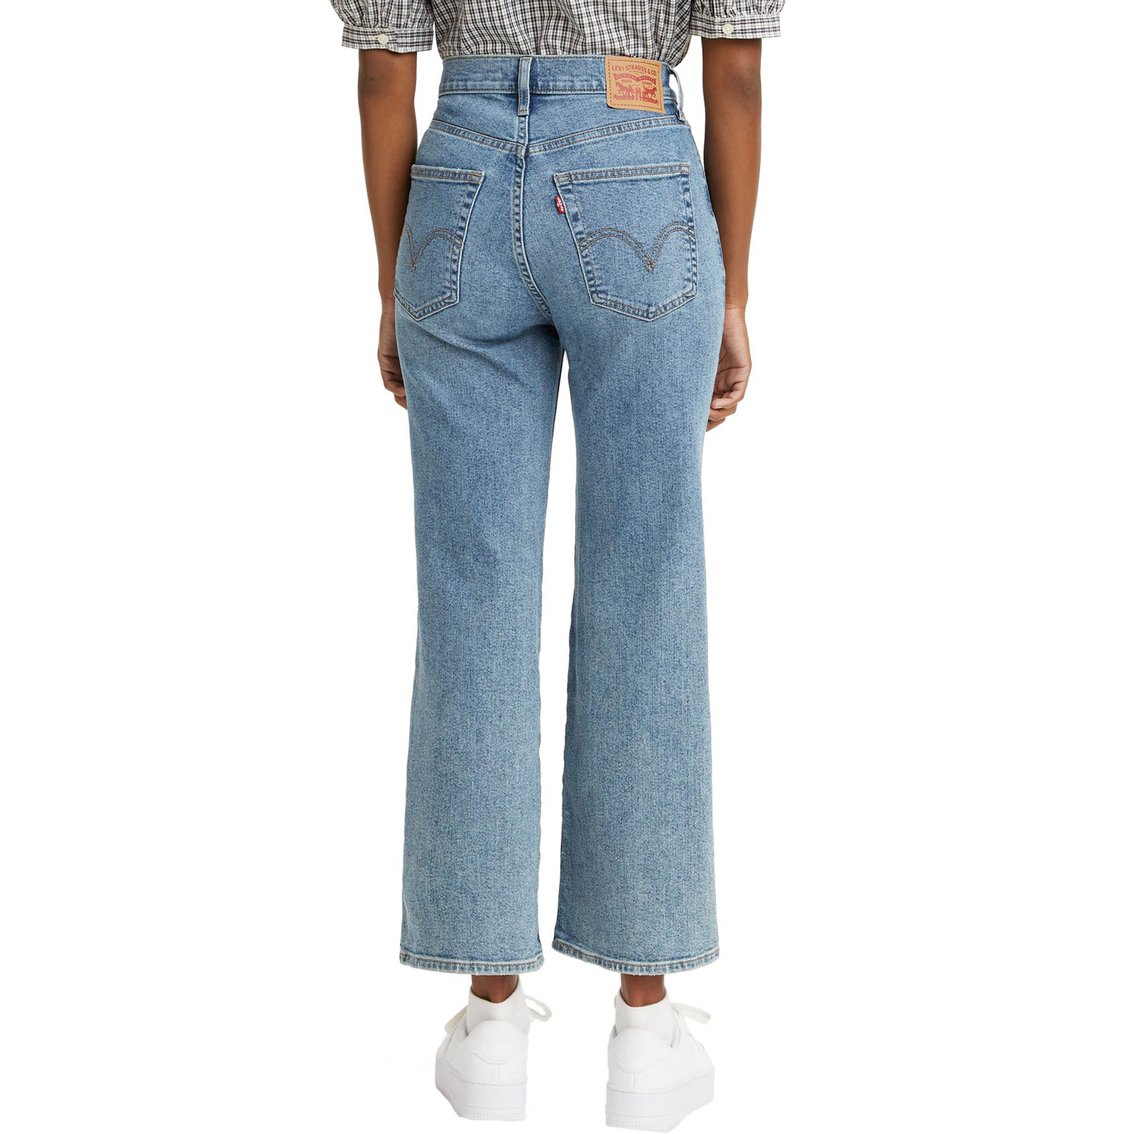 Levi's High Waisted Cropped Flare Jeans | Jeans | Clothing ...